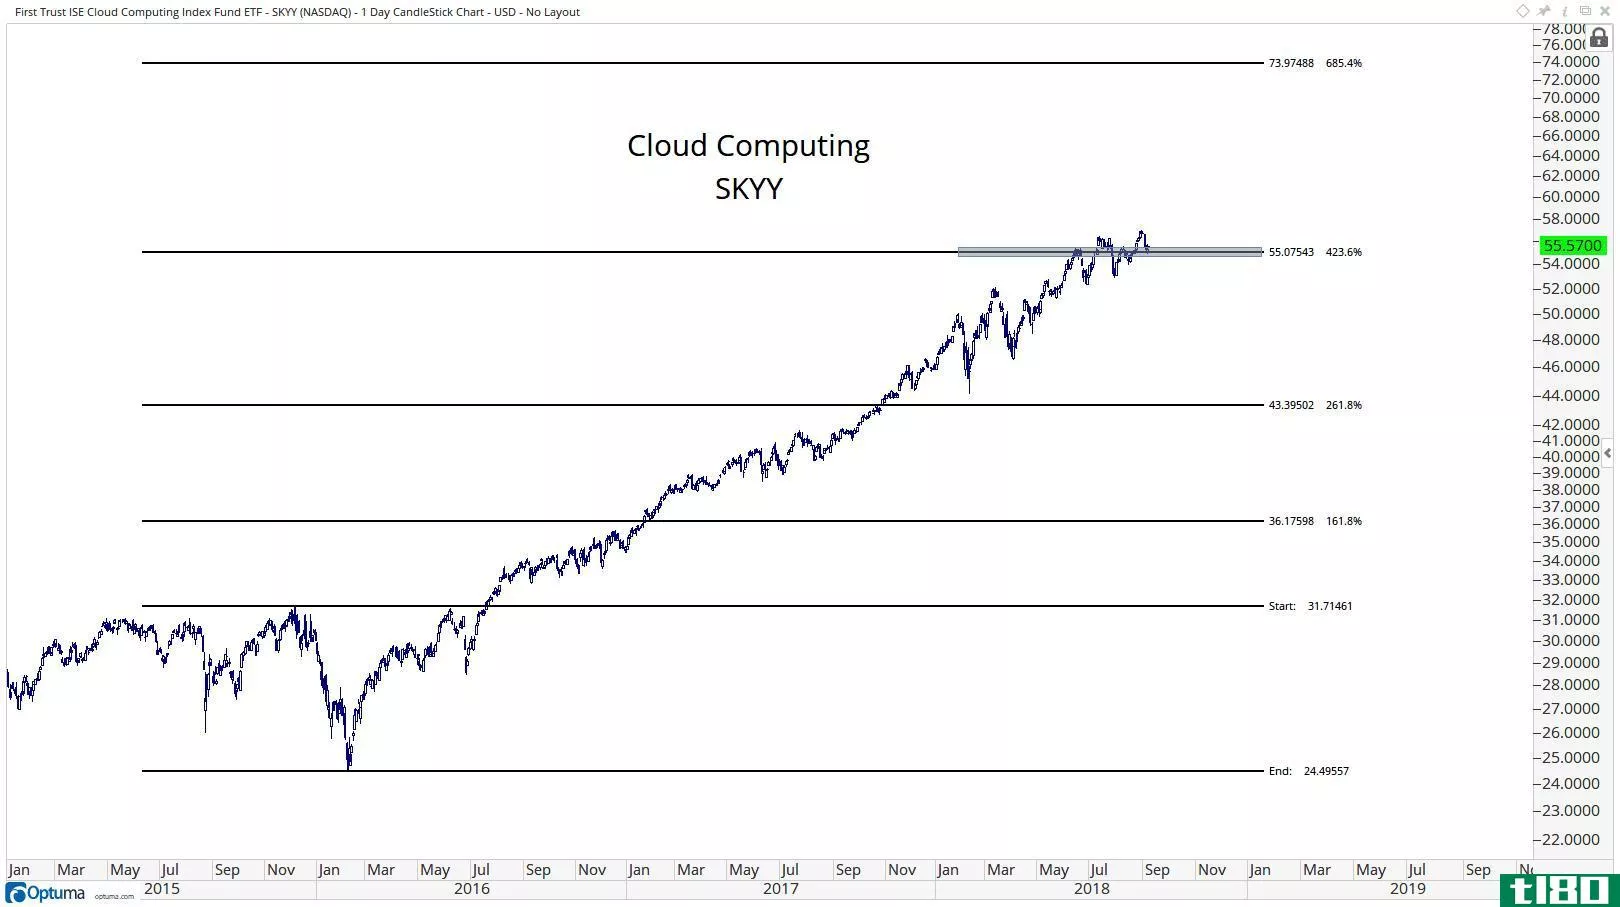 Technical chart showing the performance of the First Trust ISE Cloud Computing Index Fund ETF (SKYY)